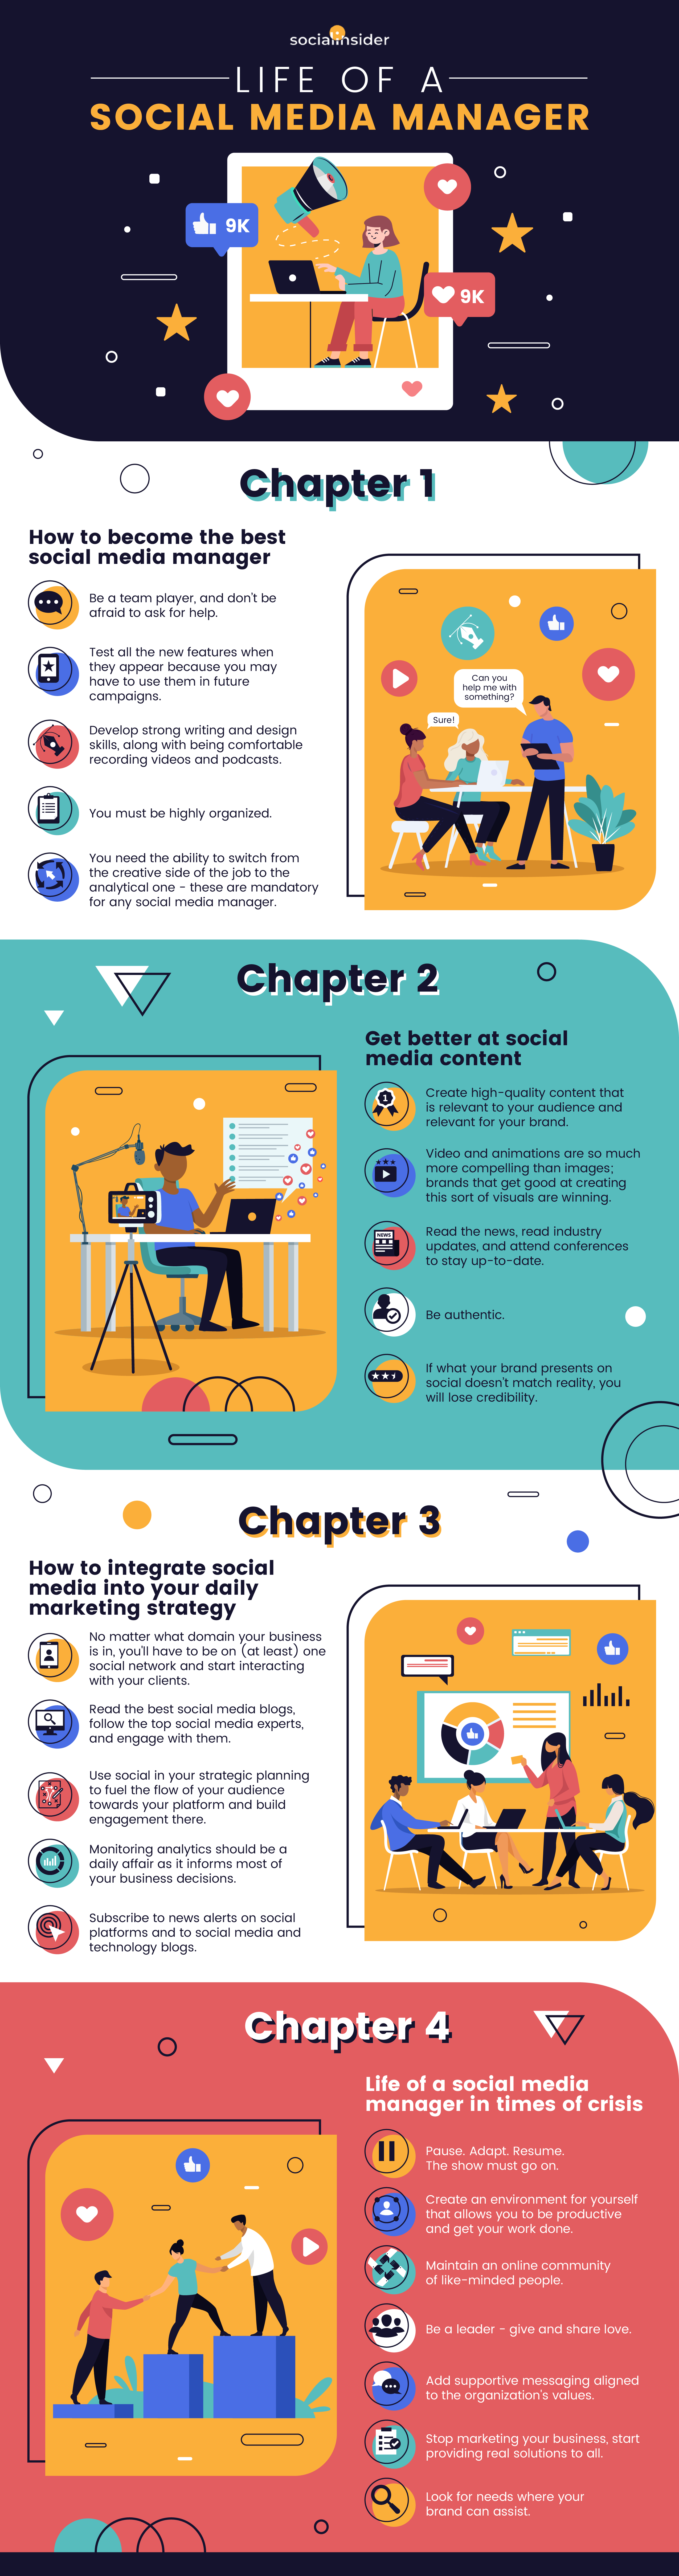 Life of a social media manager infographic